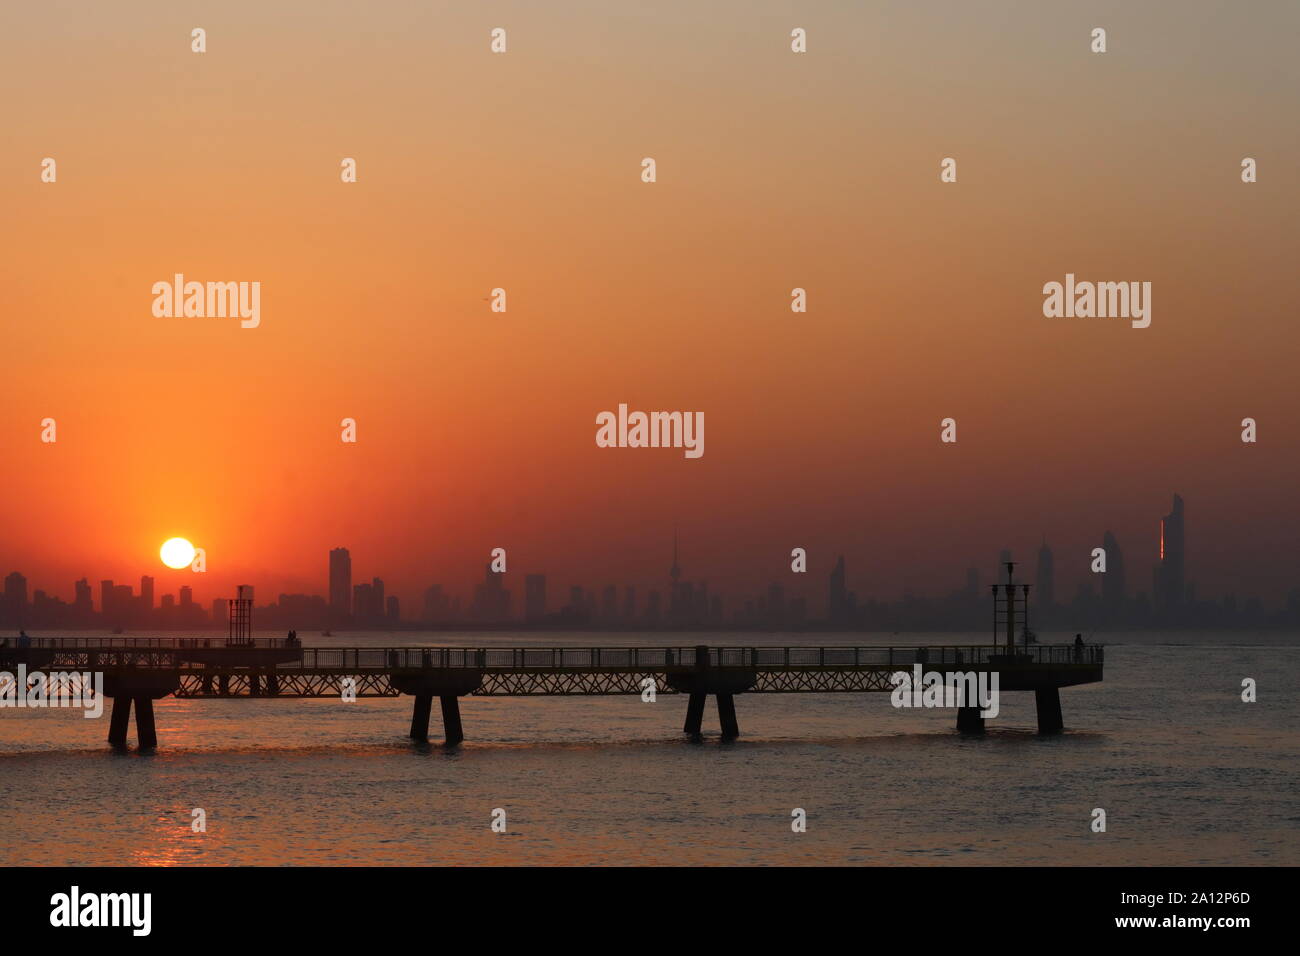 Pier and city skyline silhouetted against a spectacular setting sun Stock Photo